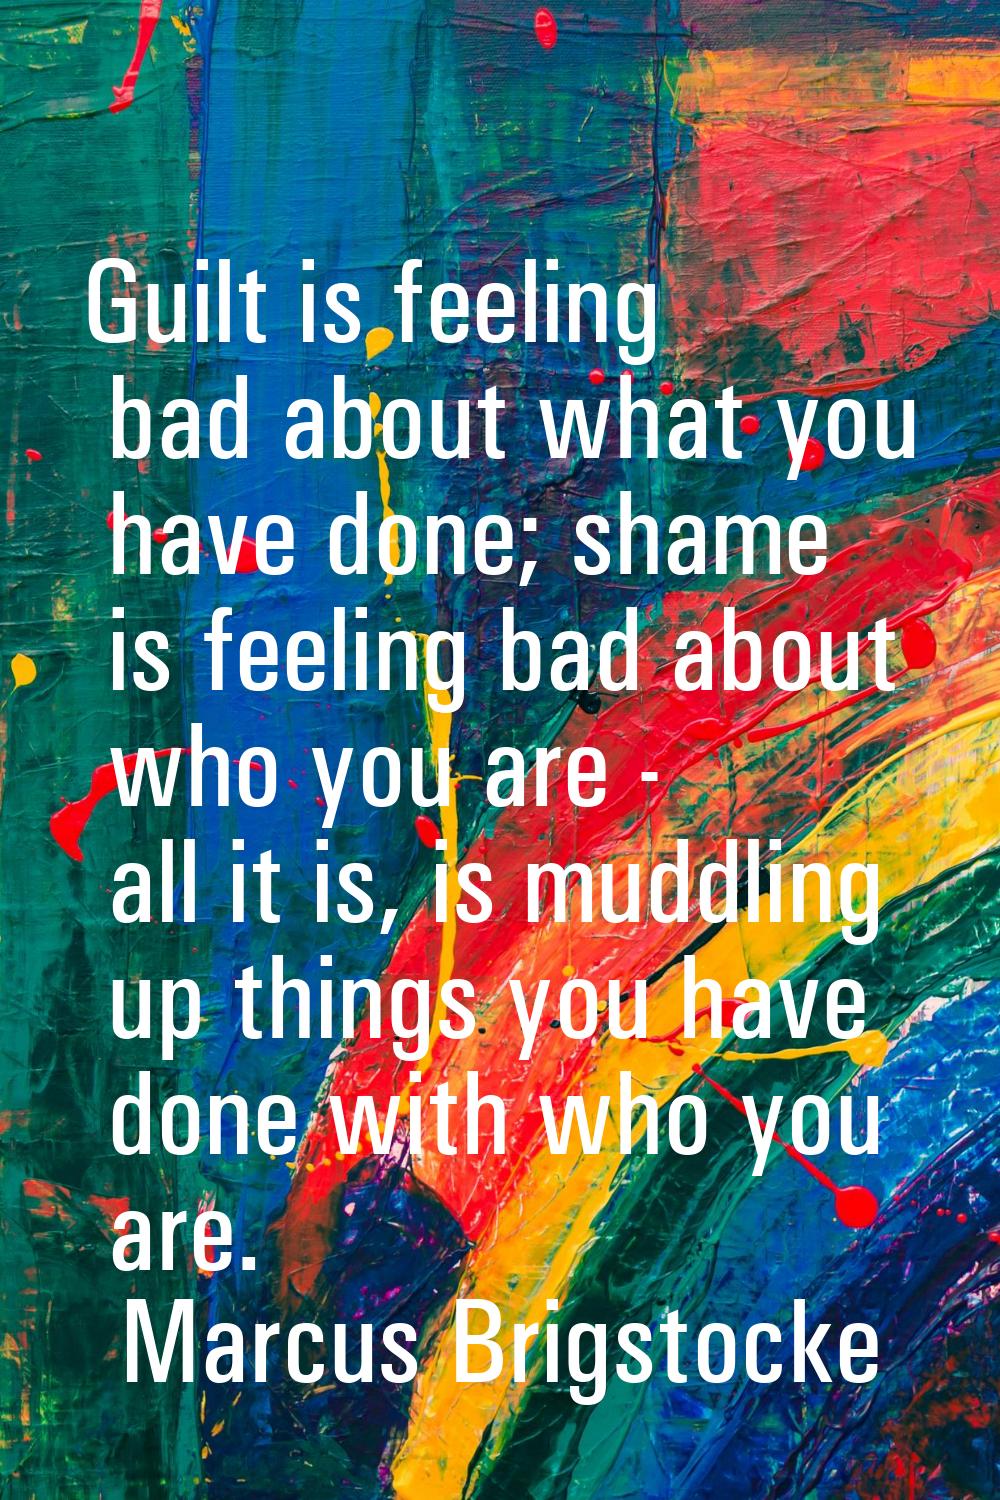 Guilt is feeling bad about what you have done; shame is feeling bad about who you are - all it is, 